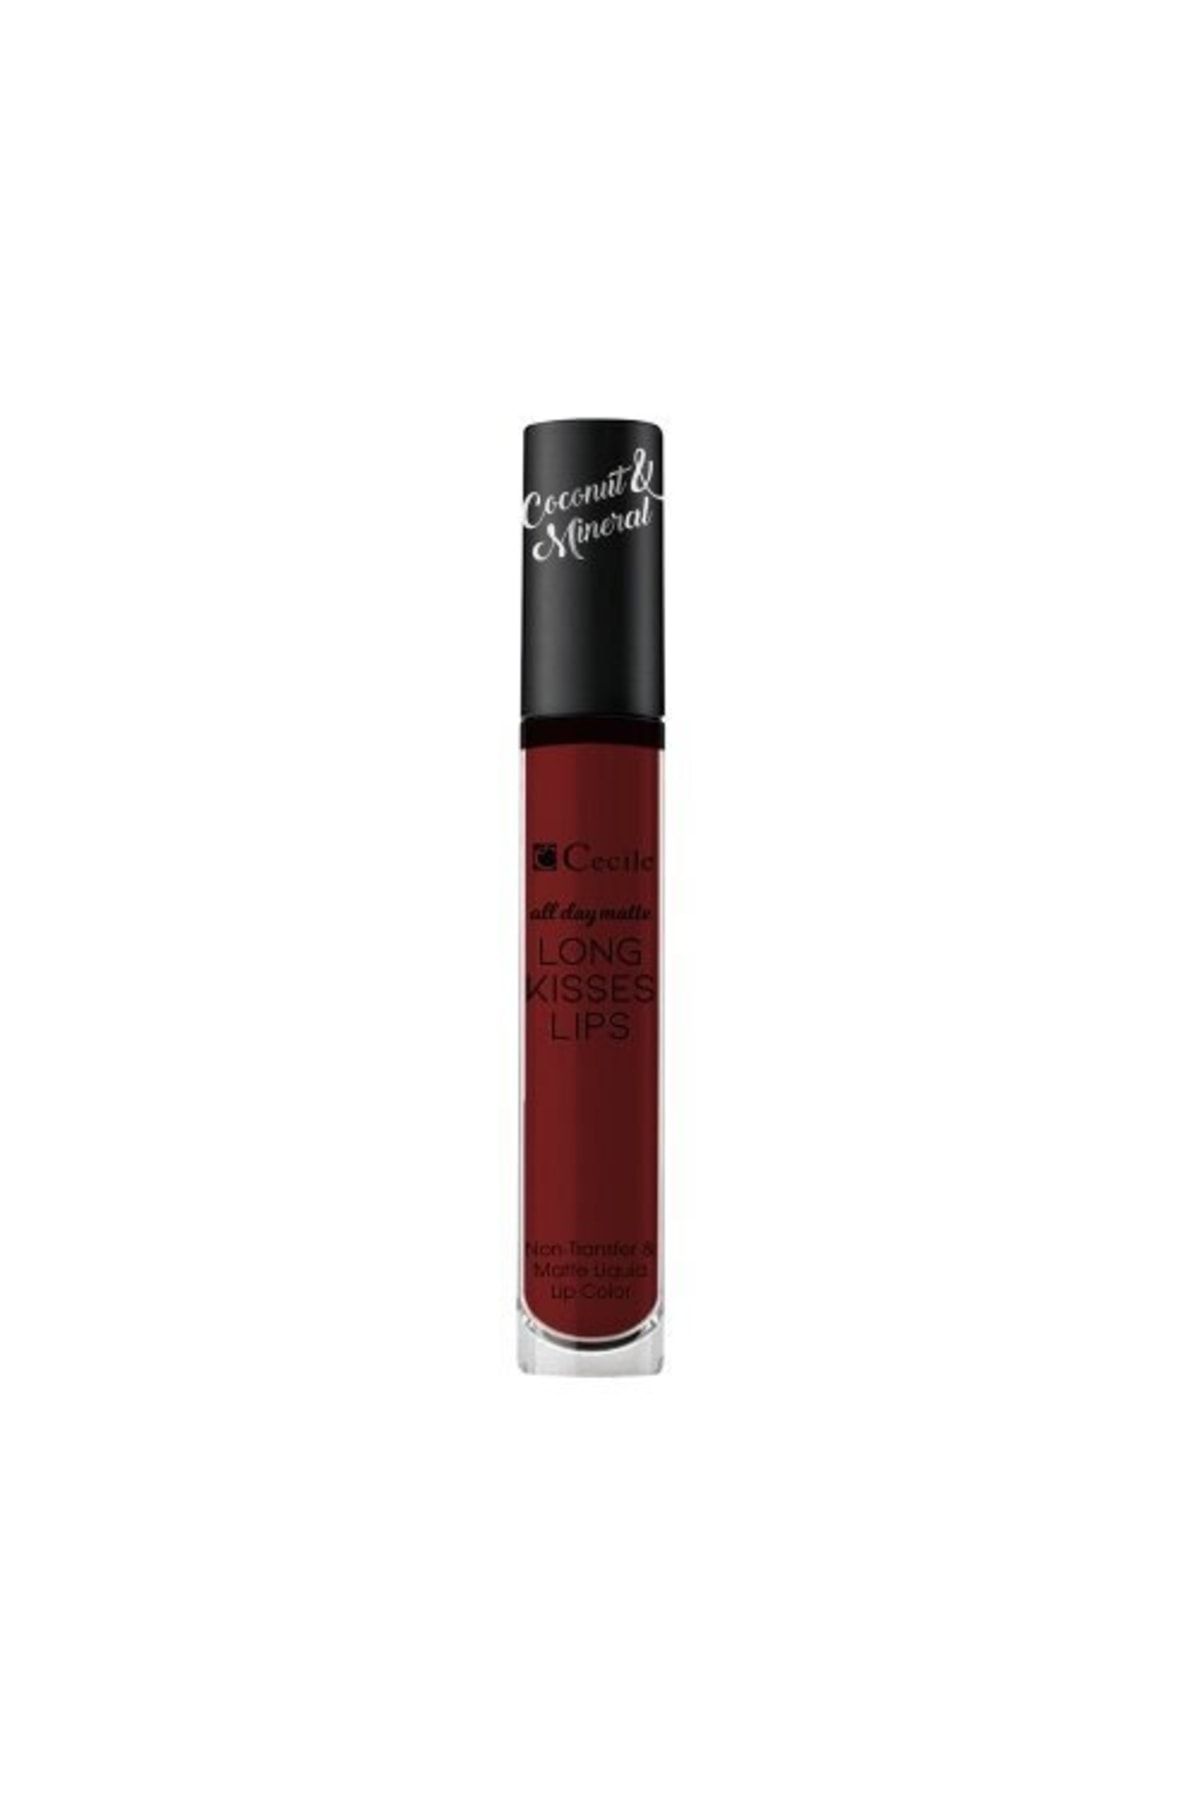 Cecile All Day Matte Long Kisses Lips 10